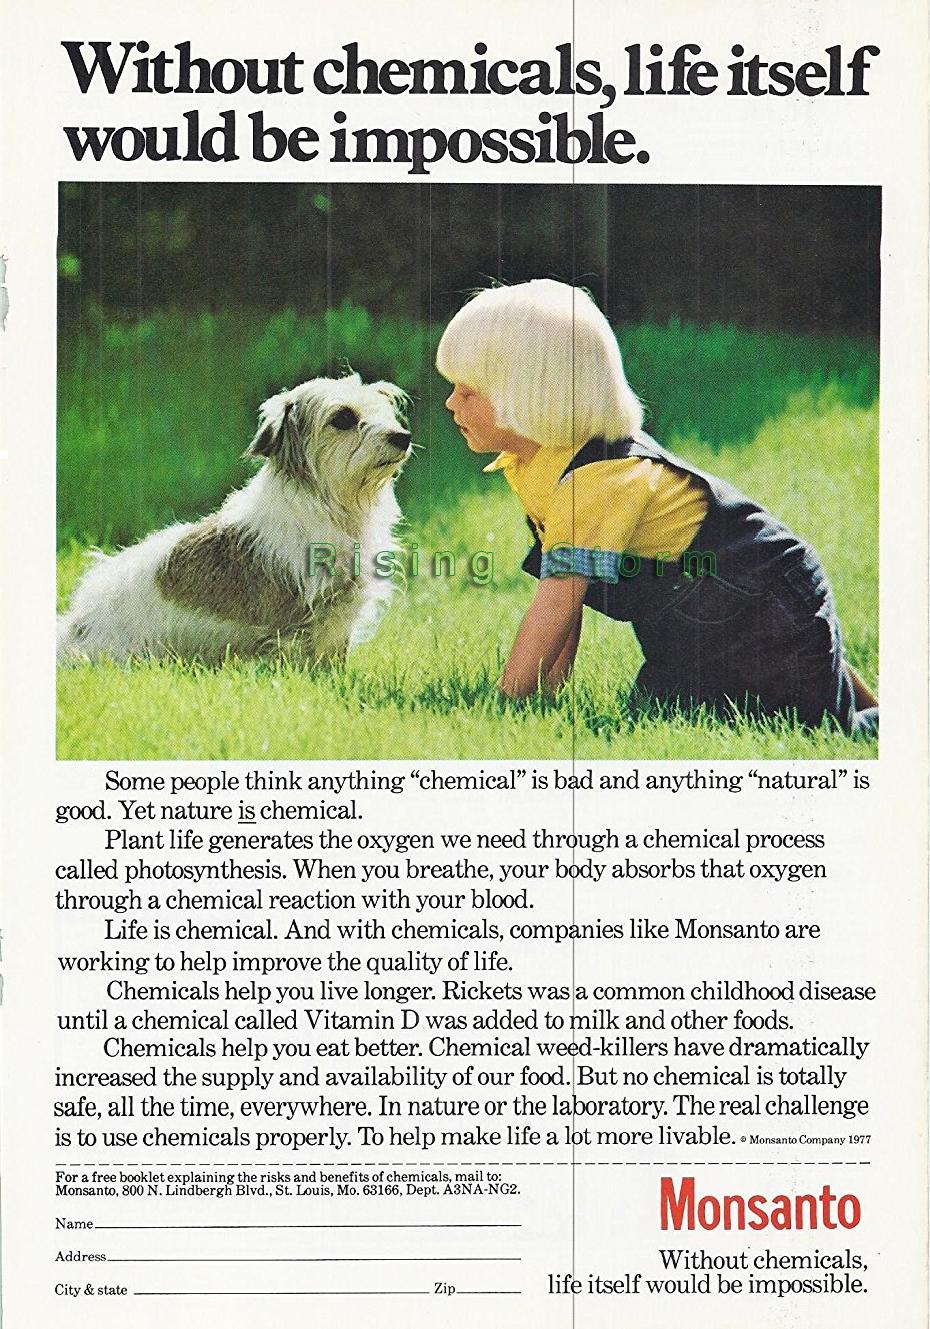 1979 Monsanto Ad in National Geographic